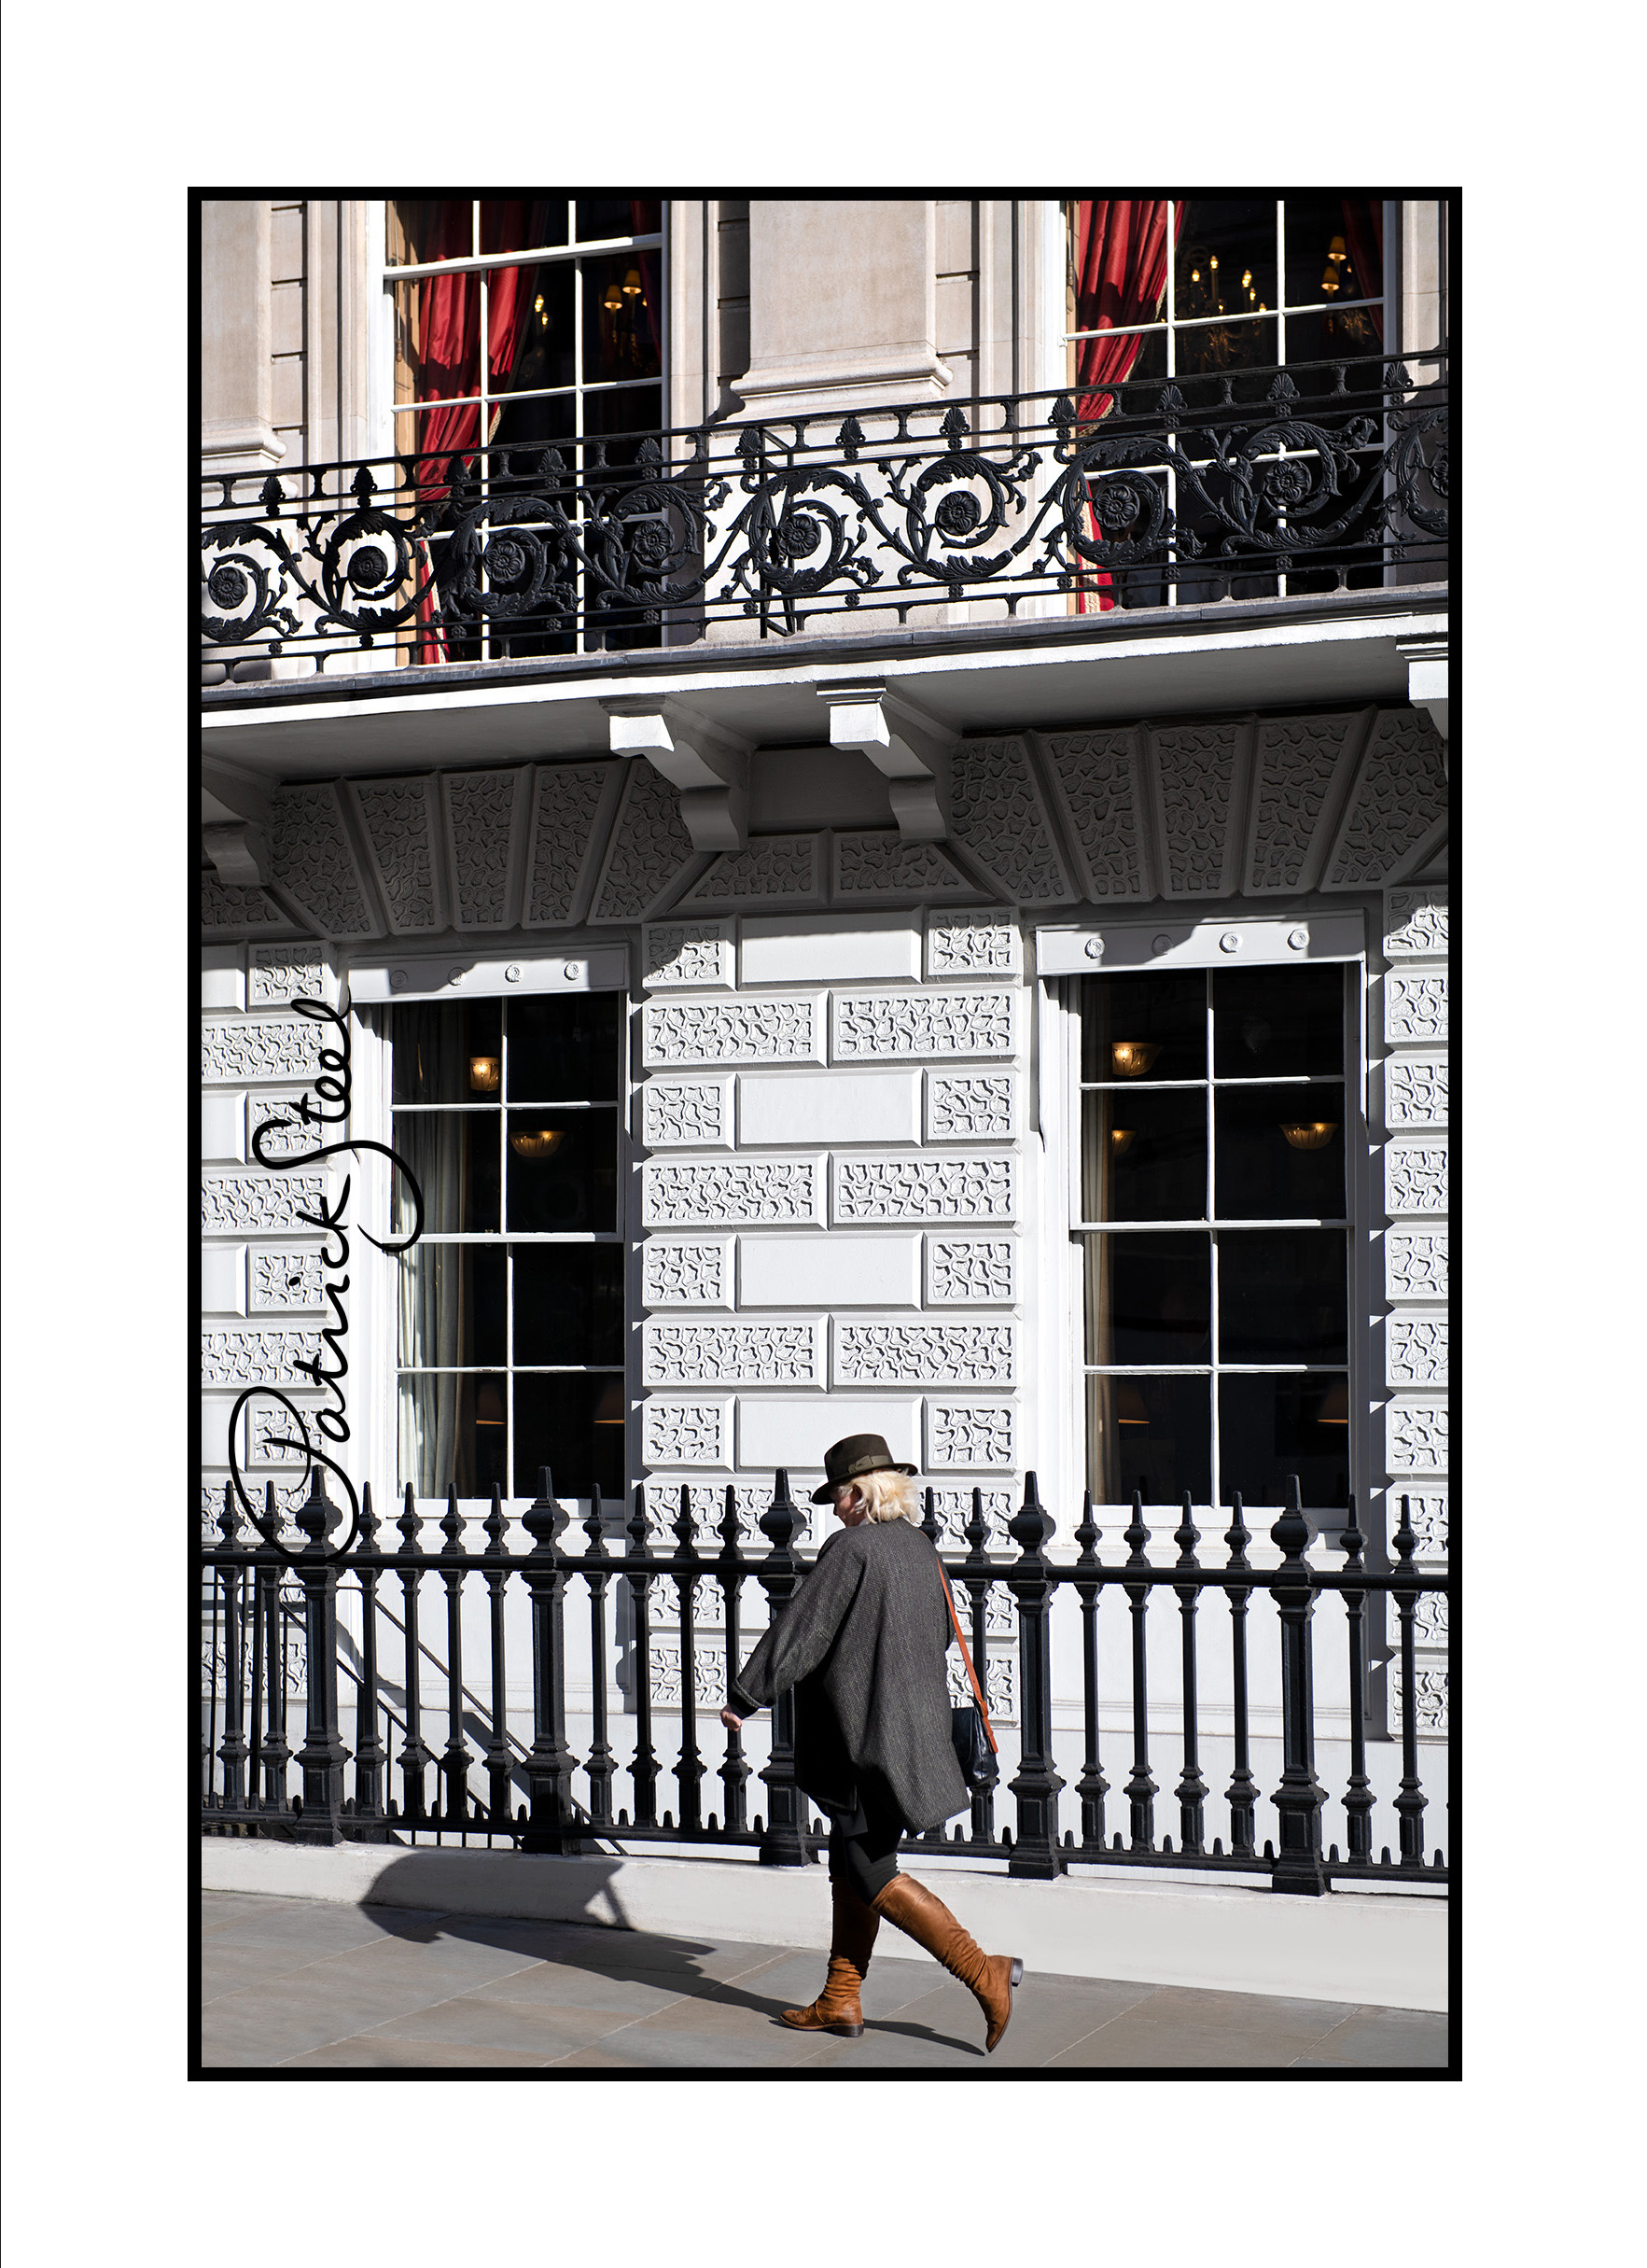 limited edition print of st james's london by photographer patrick steel